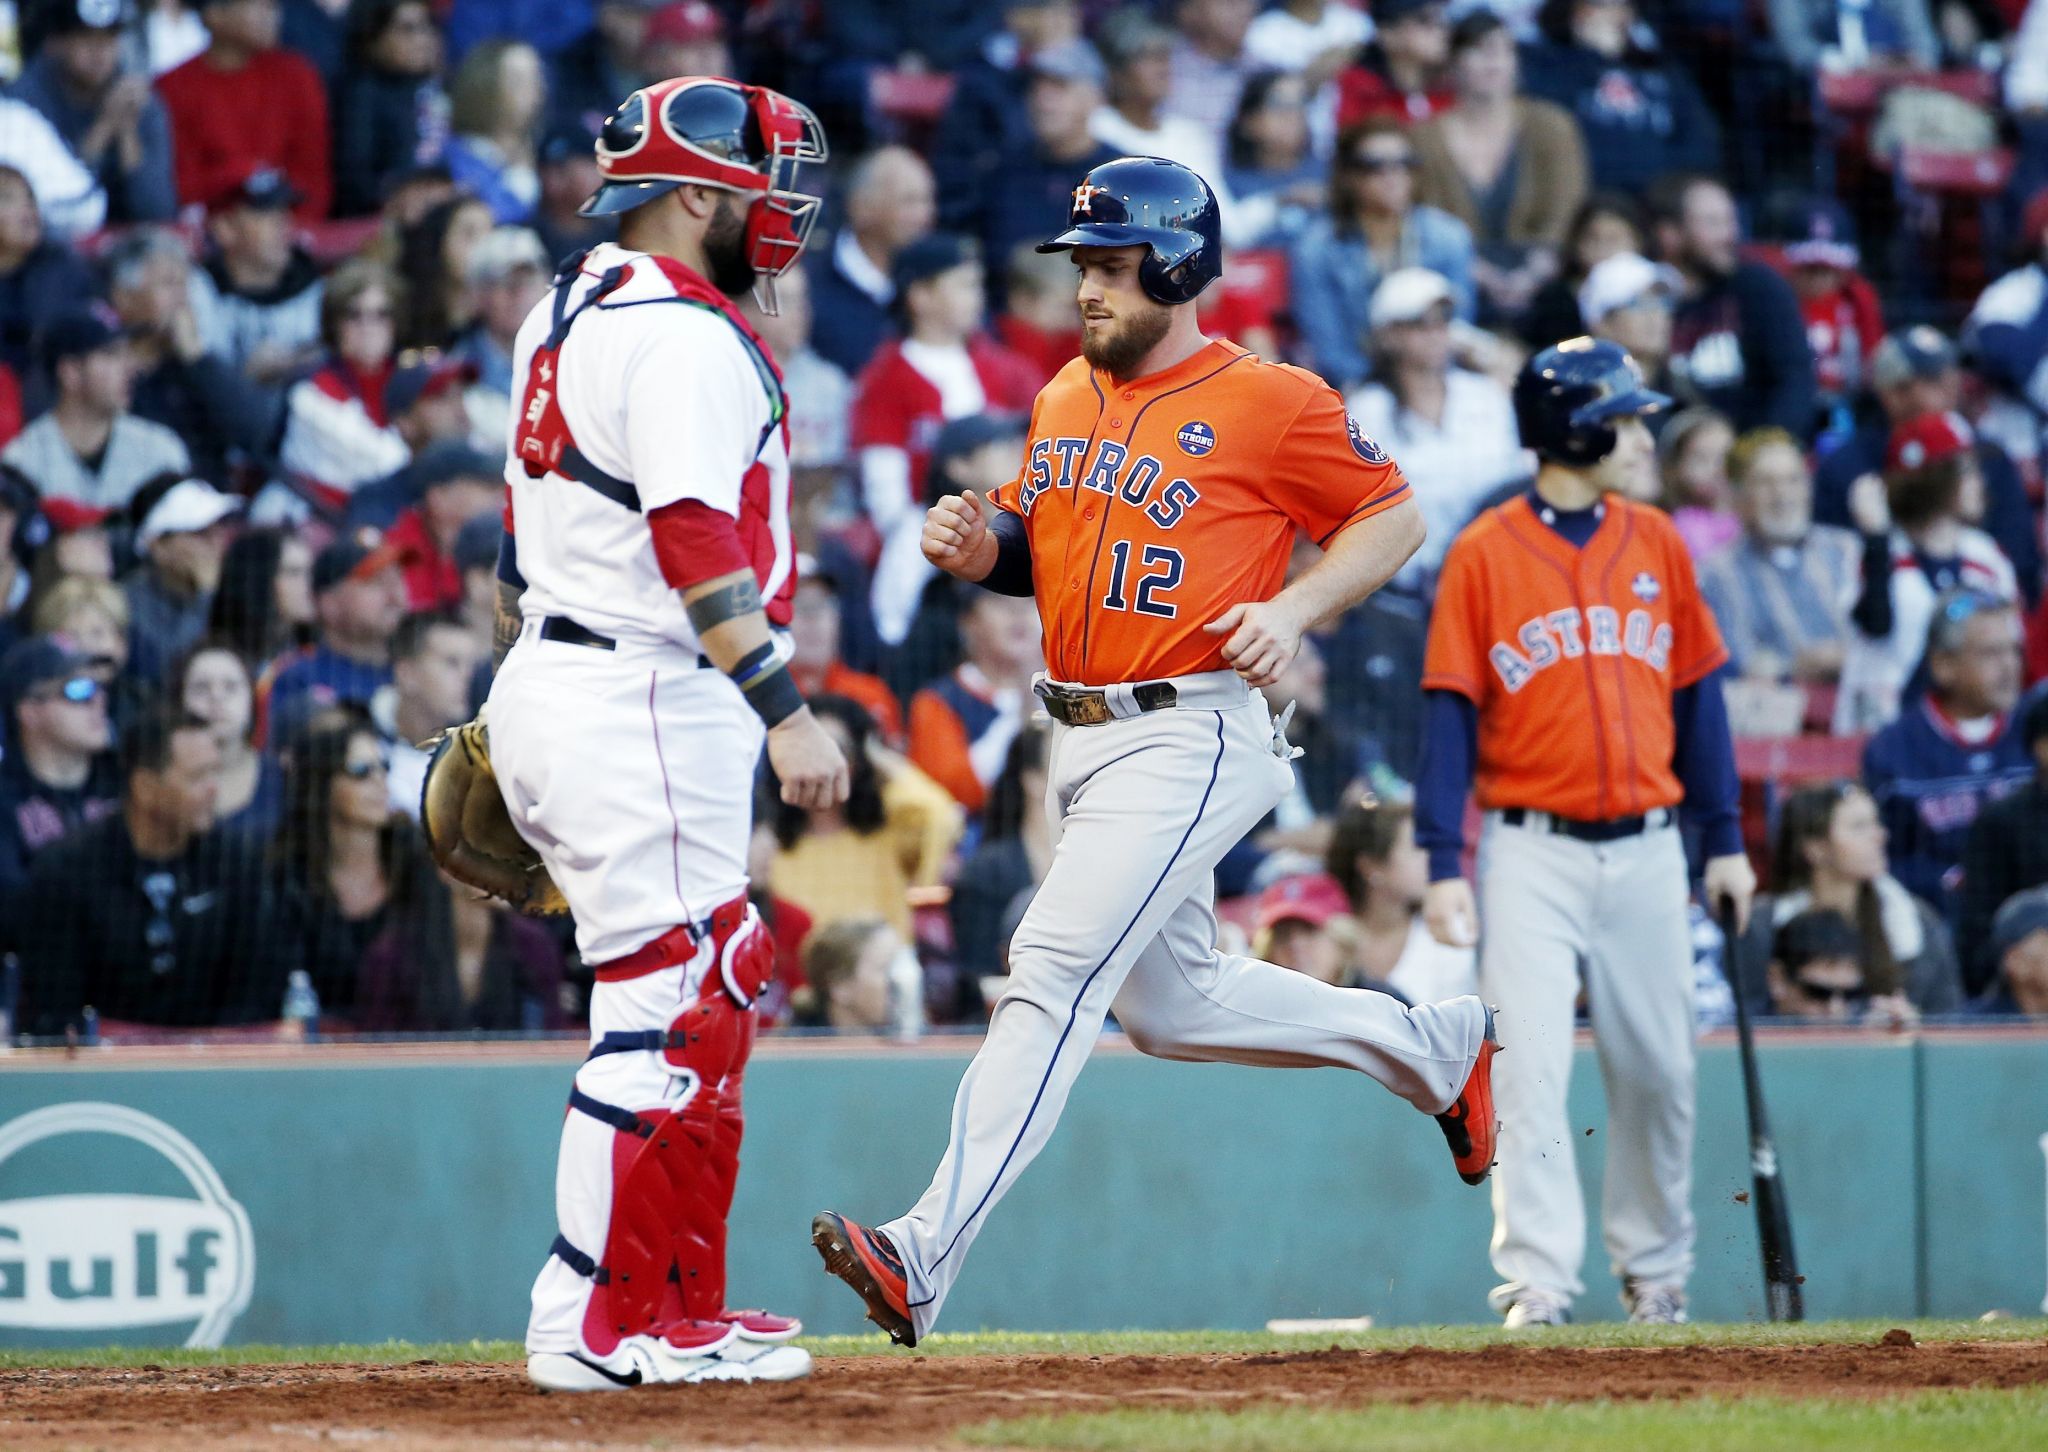 MLB Network offers free preview for first game of Astros series with Red Sox